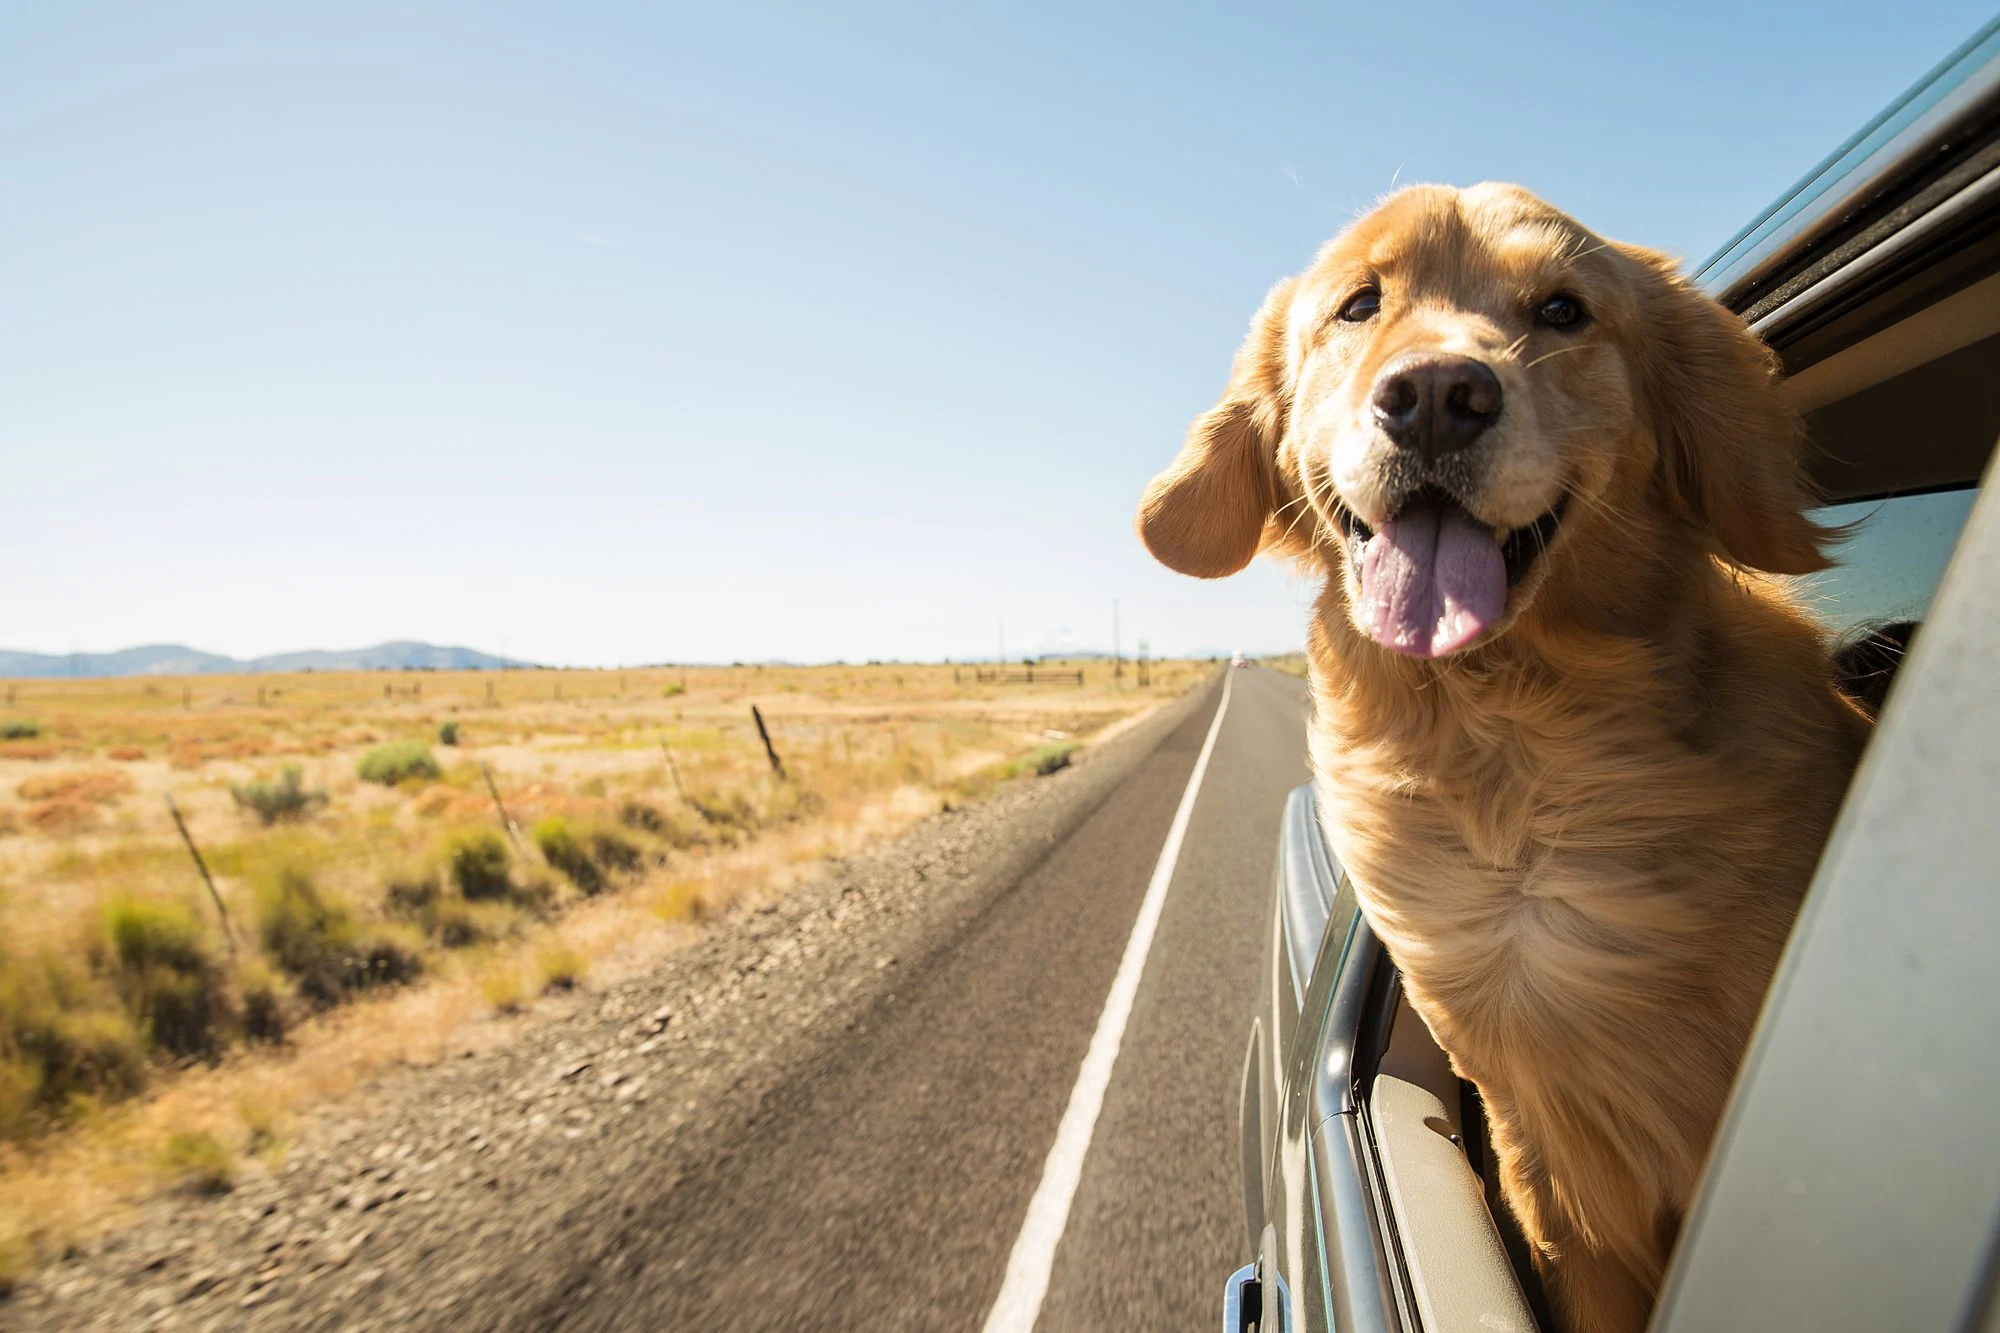 Dog on a road trip during the day.